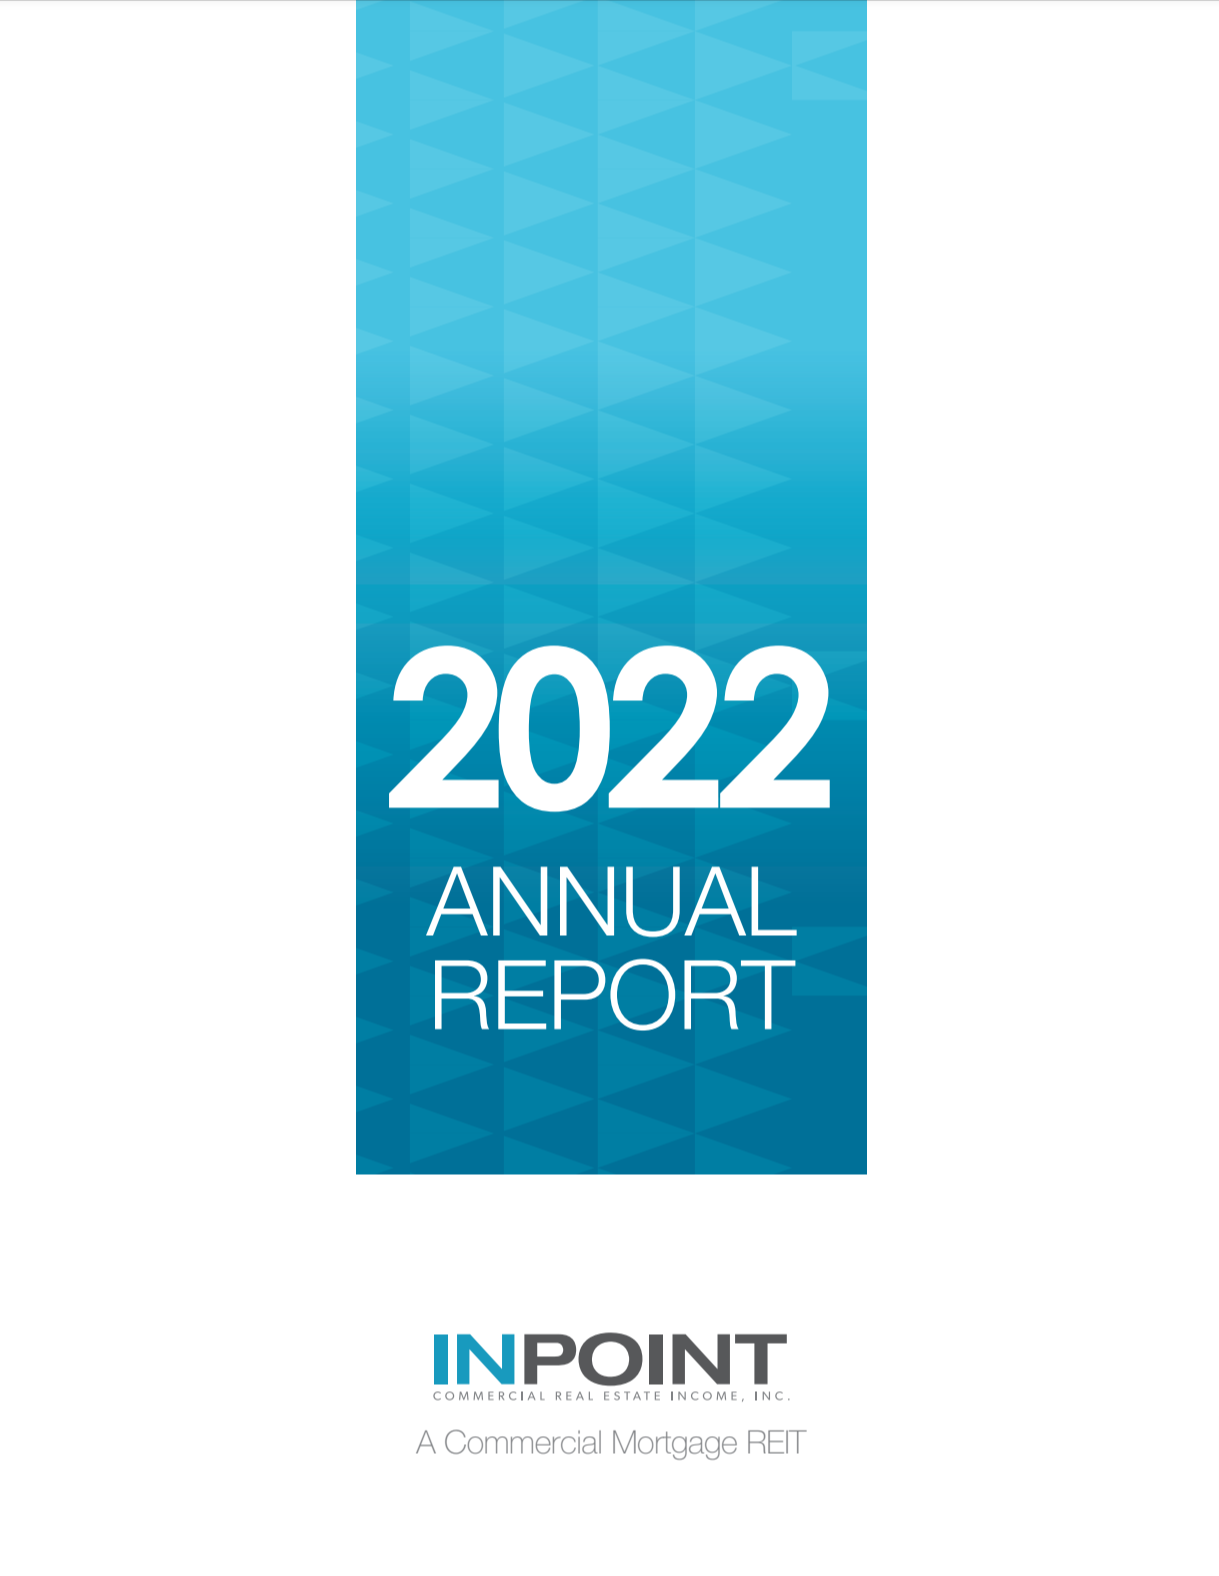 https://inland-investments.com/sites/default/files/2022-InPoint-Annual-Report-2.…